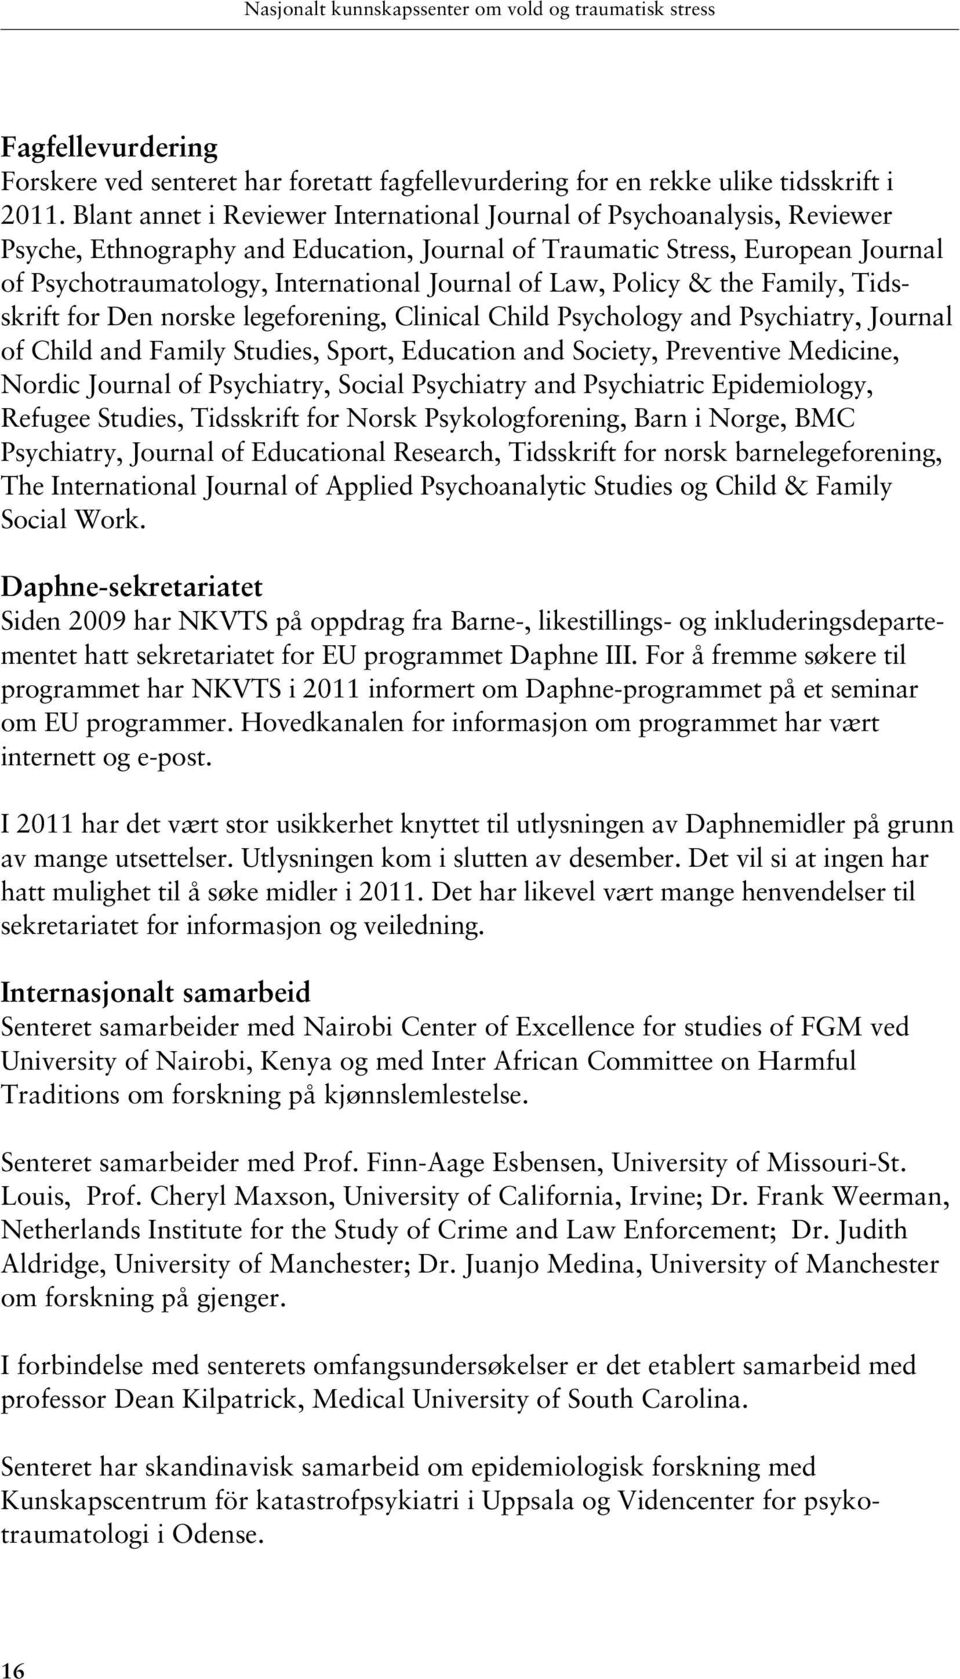 of Law, Policy & the Family, Tidsskrift for Den norske legeforening, Clinical Child Psychology and Psychiatry, Journal of Child and Family Studies, Sport, Education and Society, Preventive Medicine,